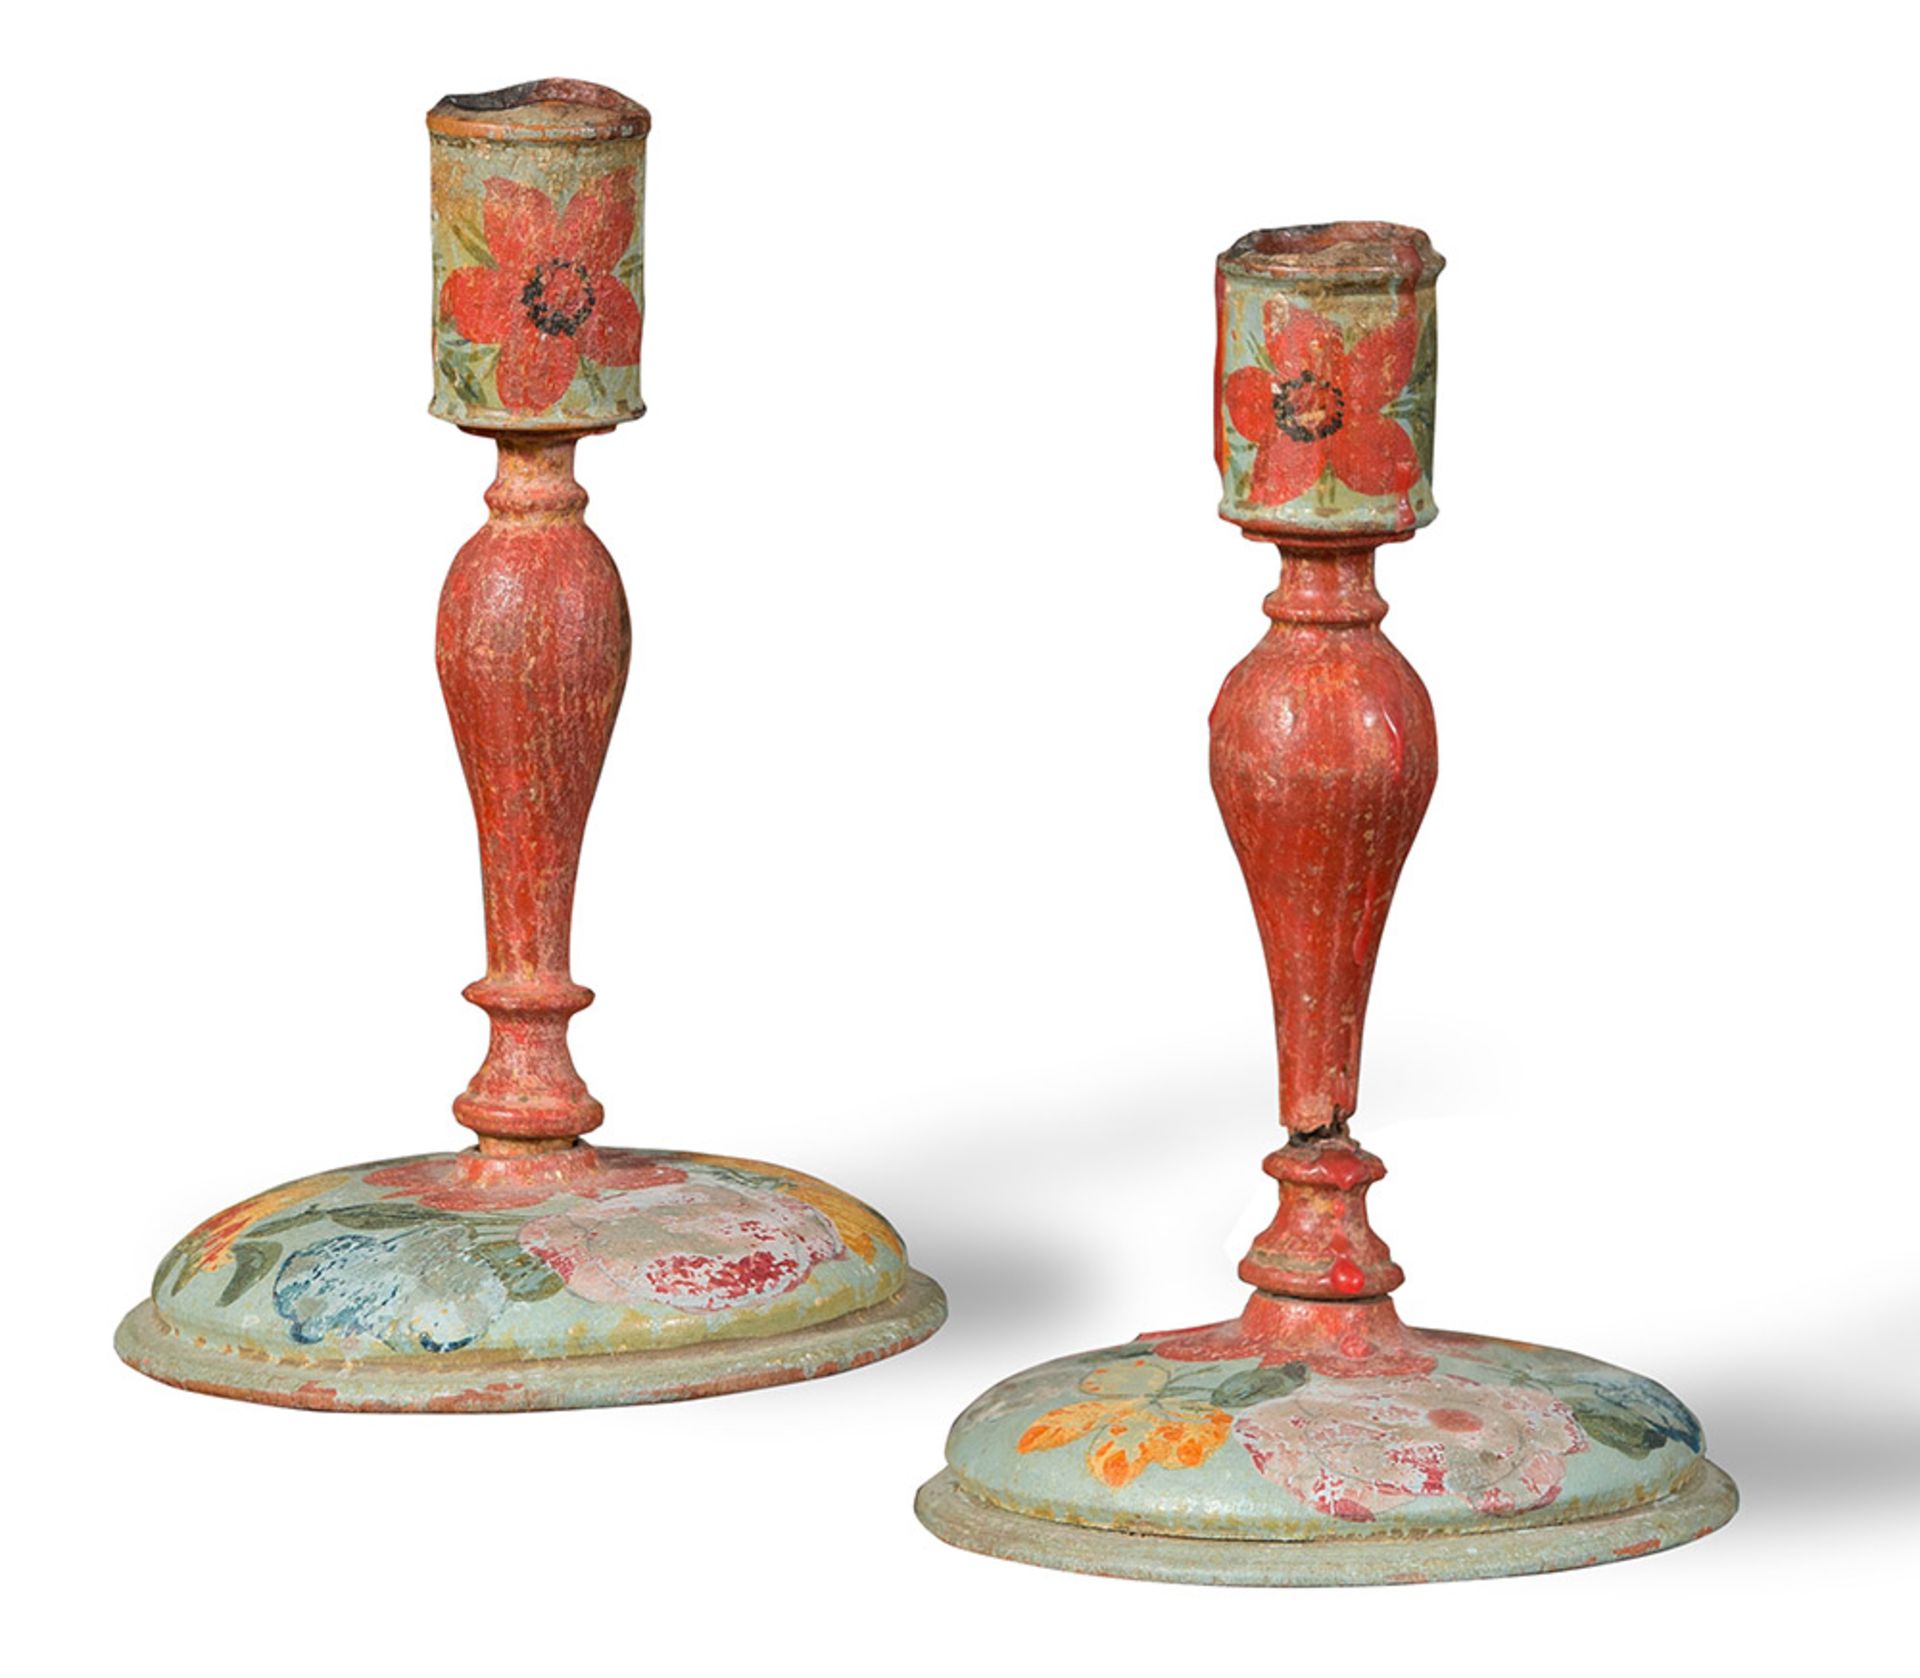 Pair of lacquered wood candlesticks, Veneto, late 18th Century